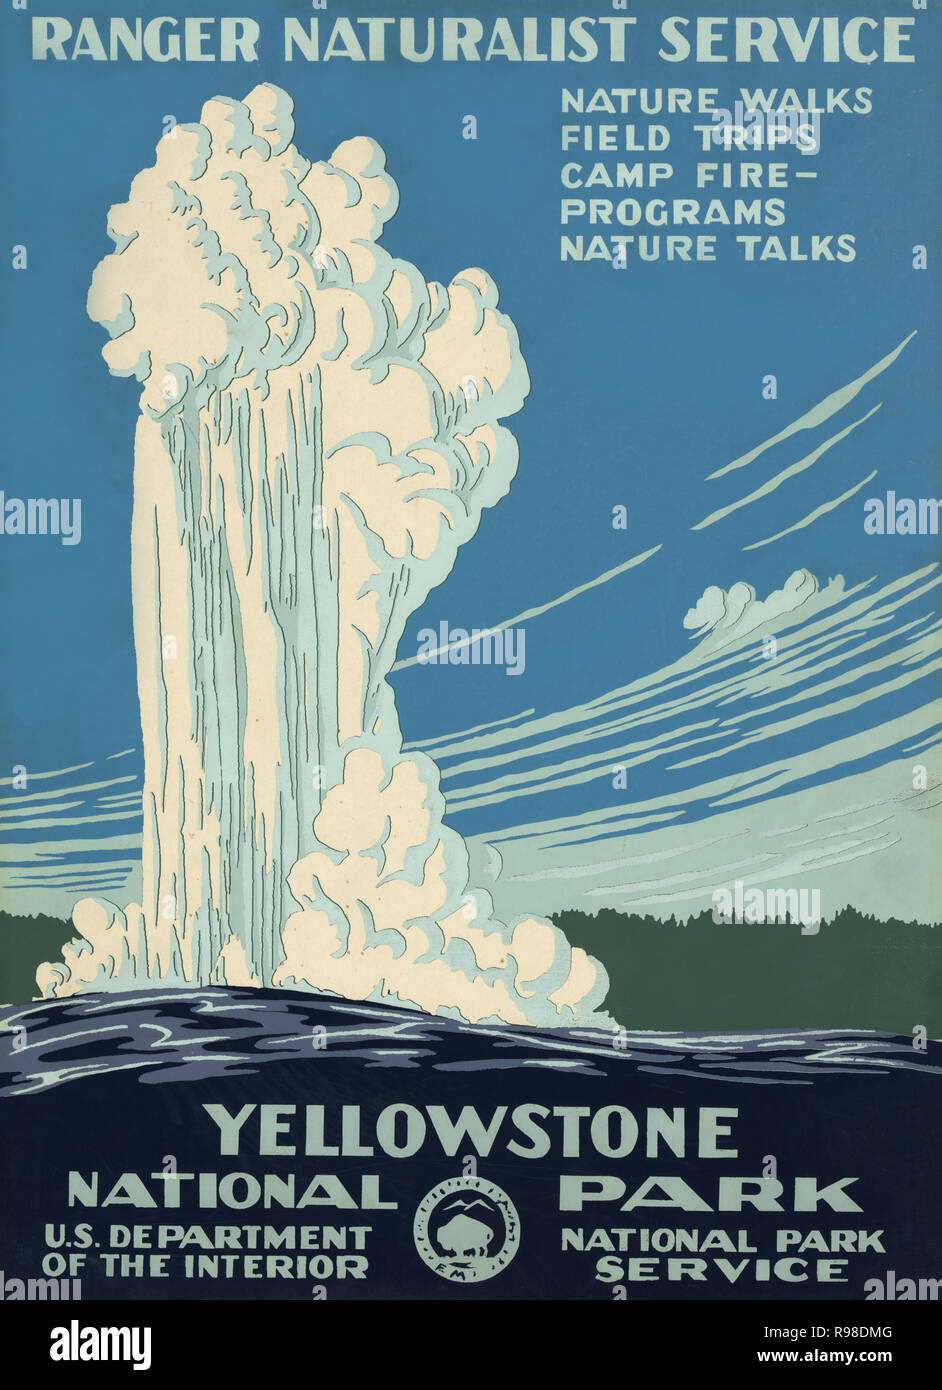 Poster Showing Old Faithful Erupting, Ranger Naturalist Service, Yellowstone National Park, U.S. Department of the Interior, National Park Service, Poster, Artwork by Don C. Powell, 1938 Stock Photo